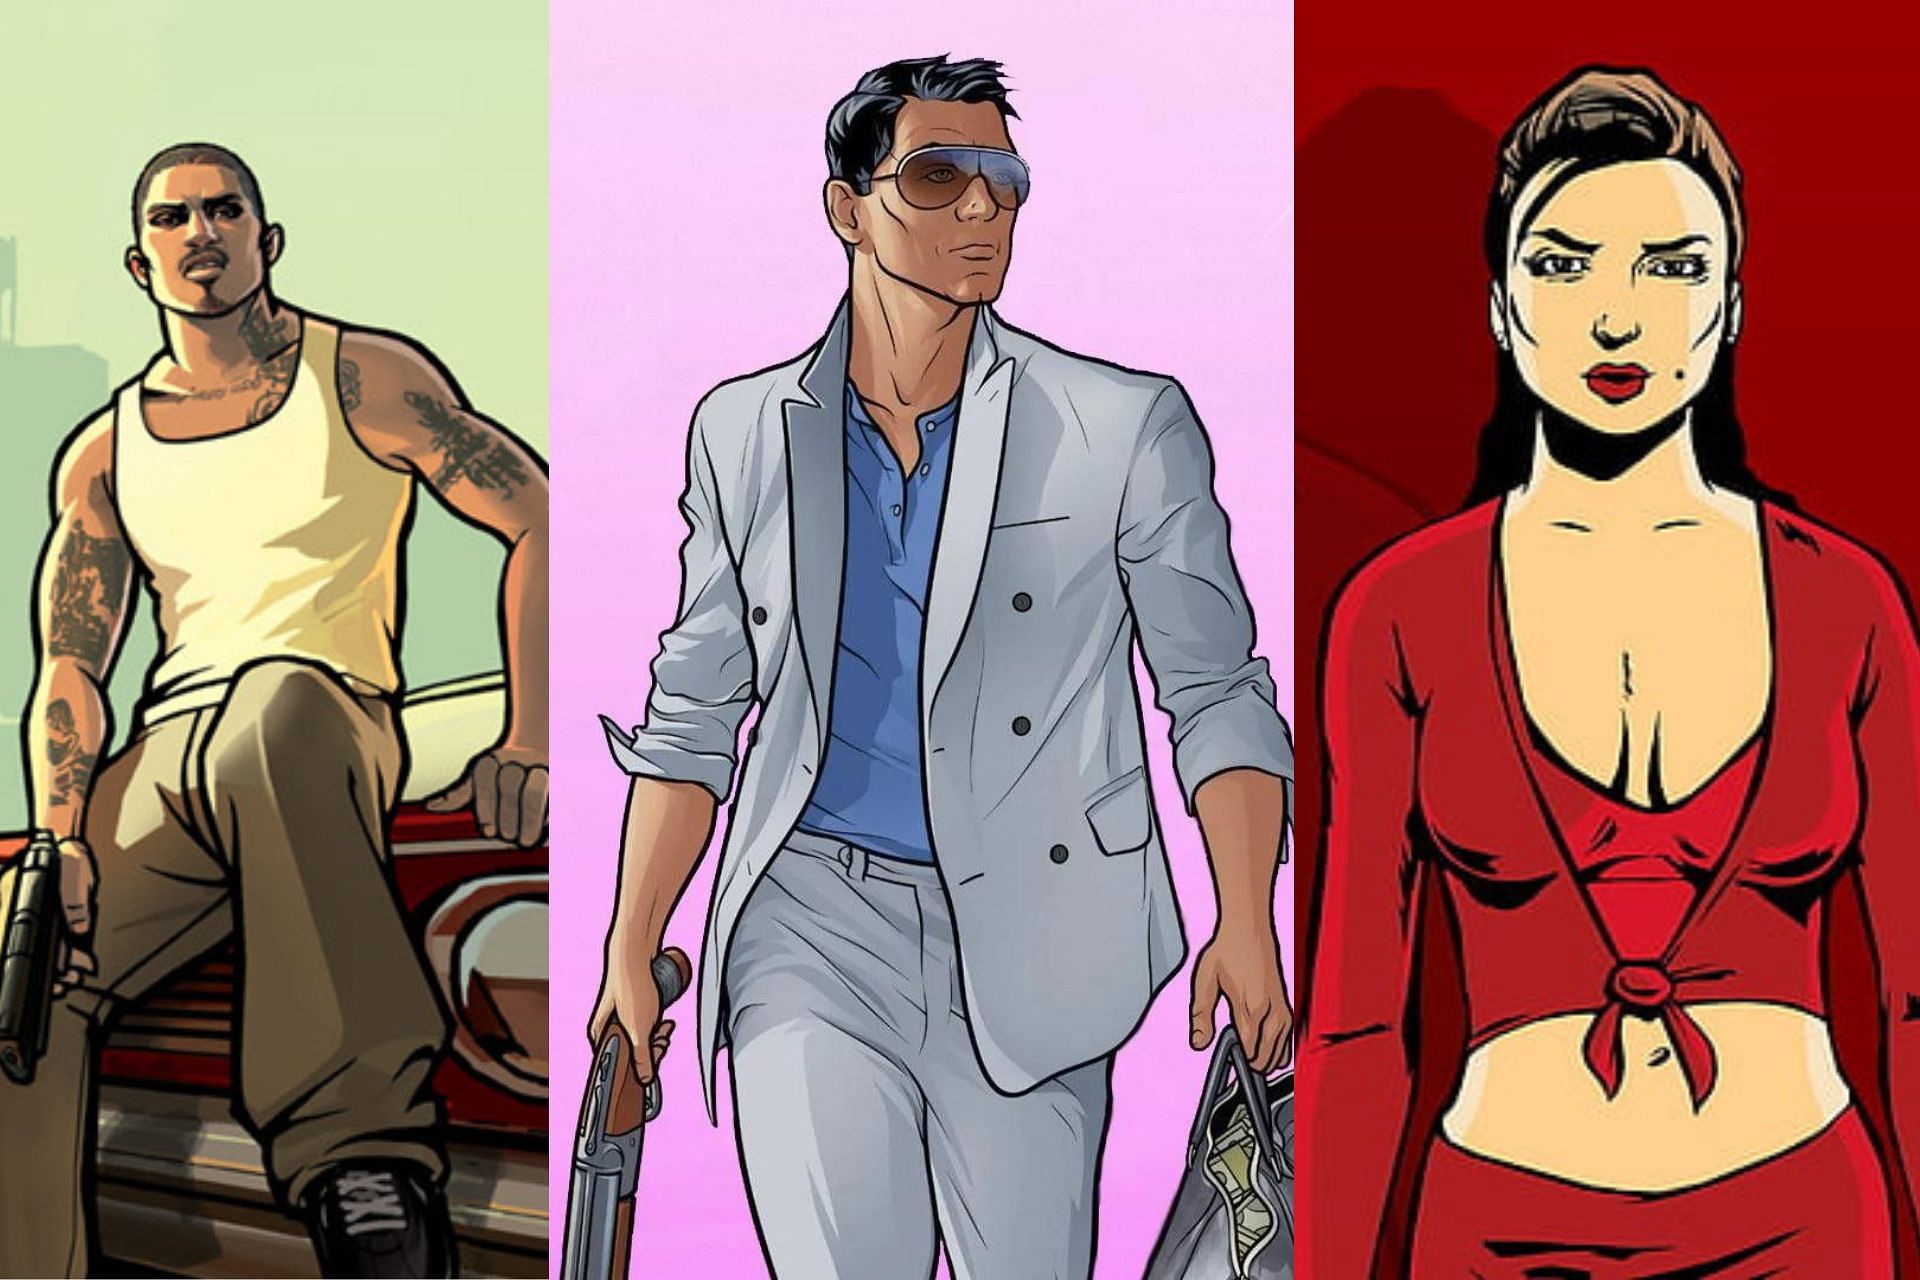 Lately, GTA Trilogy has been receiving more positive reviews from fans (Images via Sportskeeda)